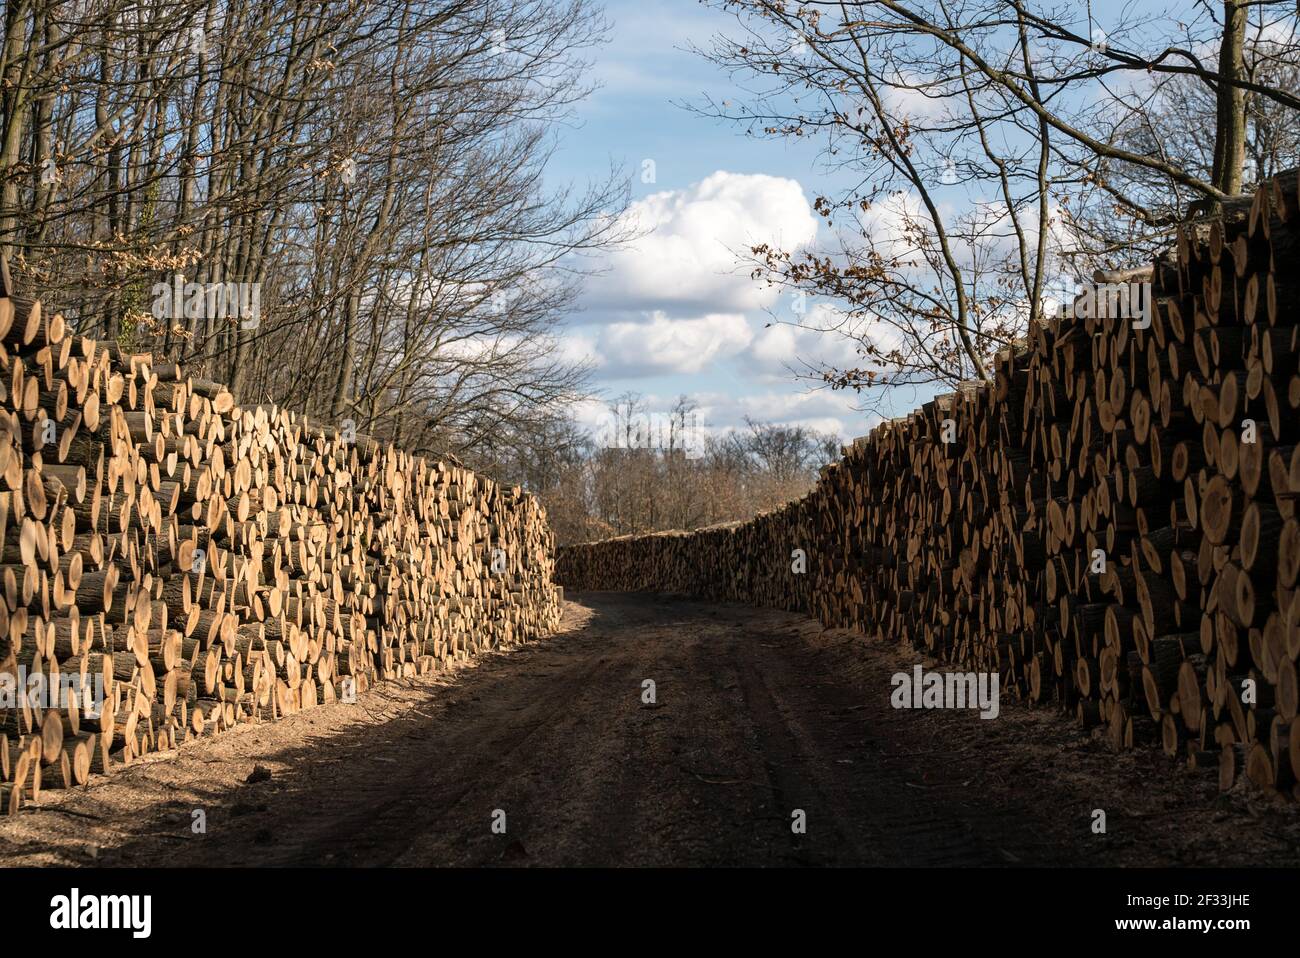 Logging in the winter. Logs are lined up. Stock photo. Stock Photo